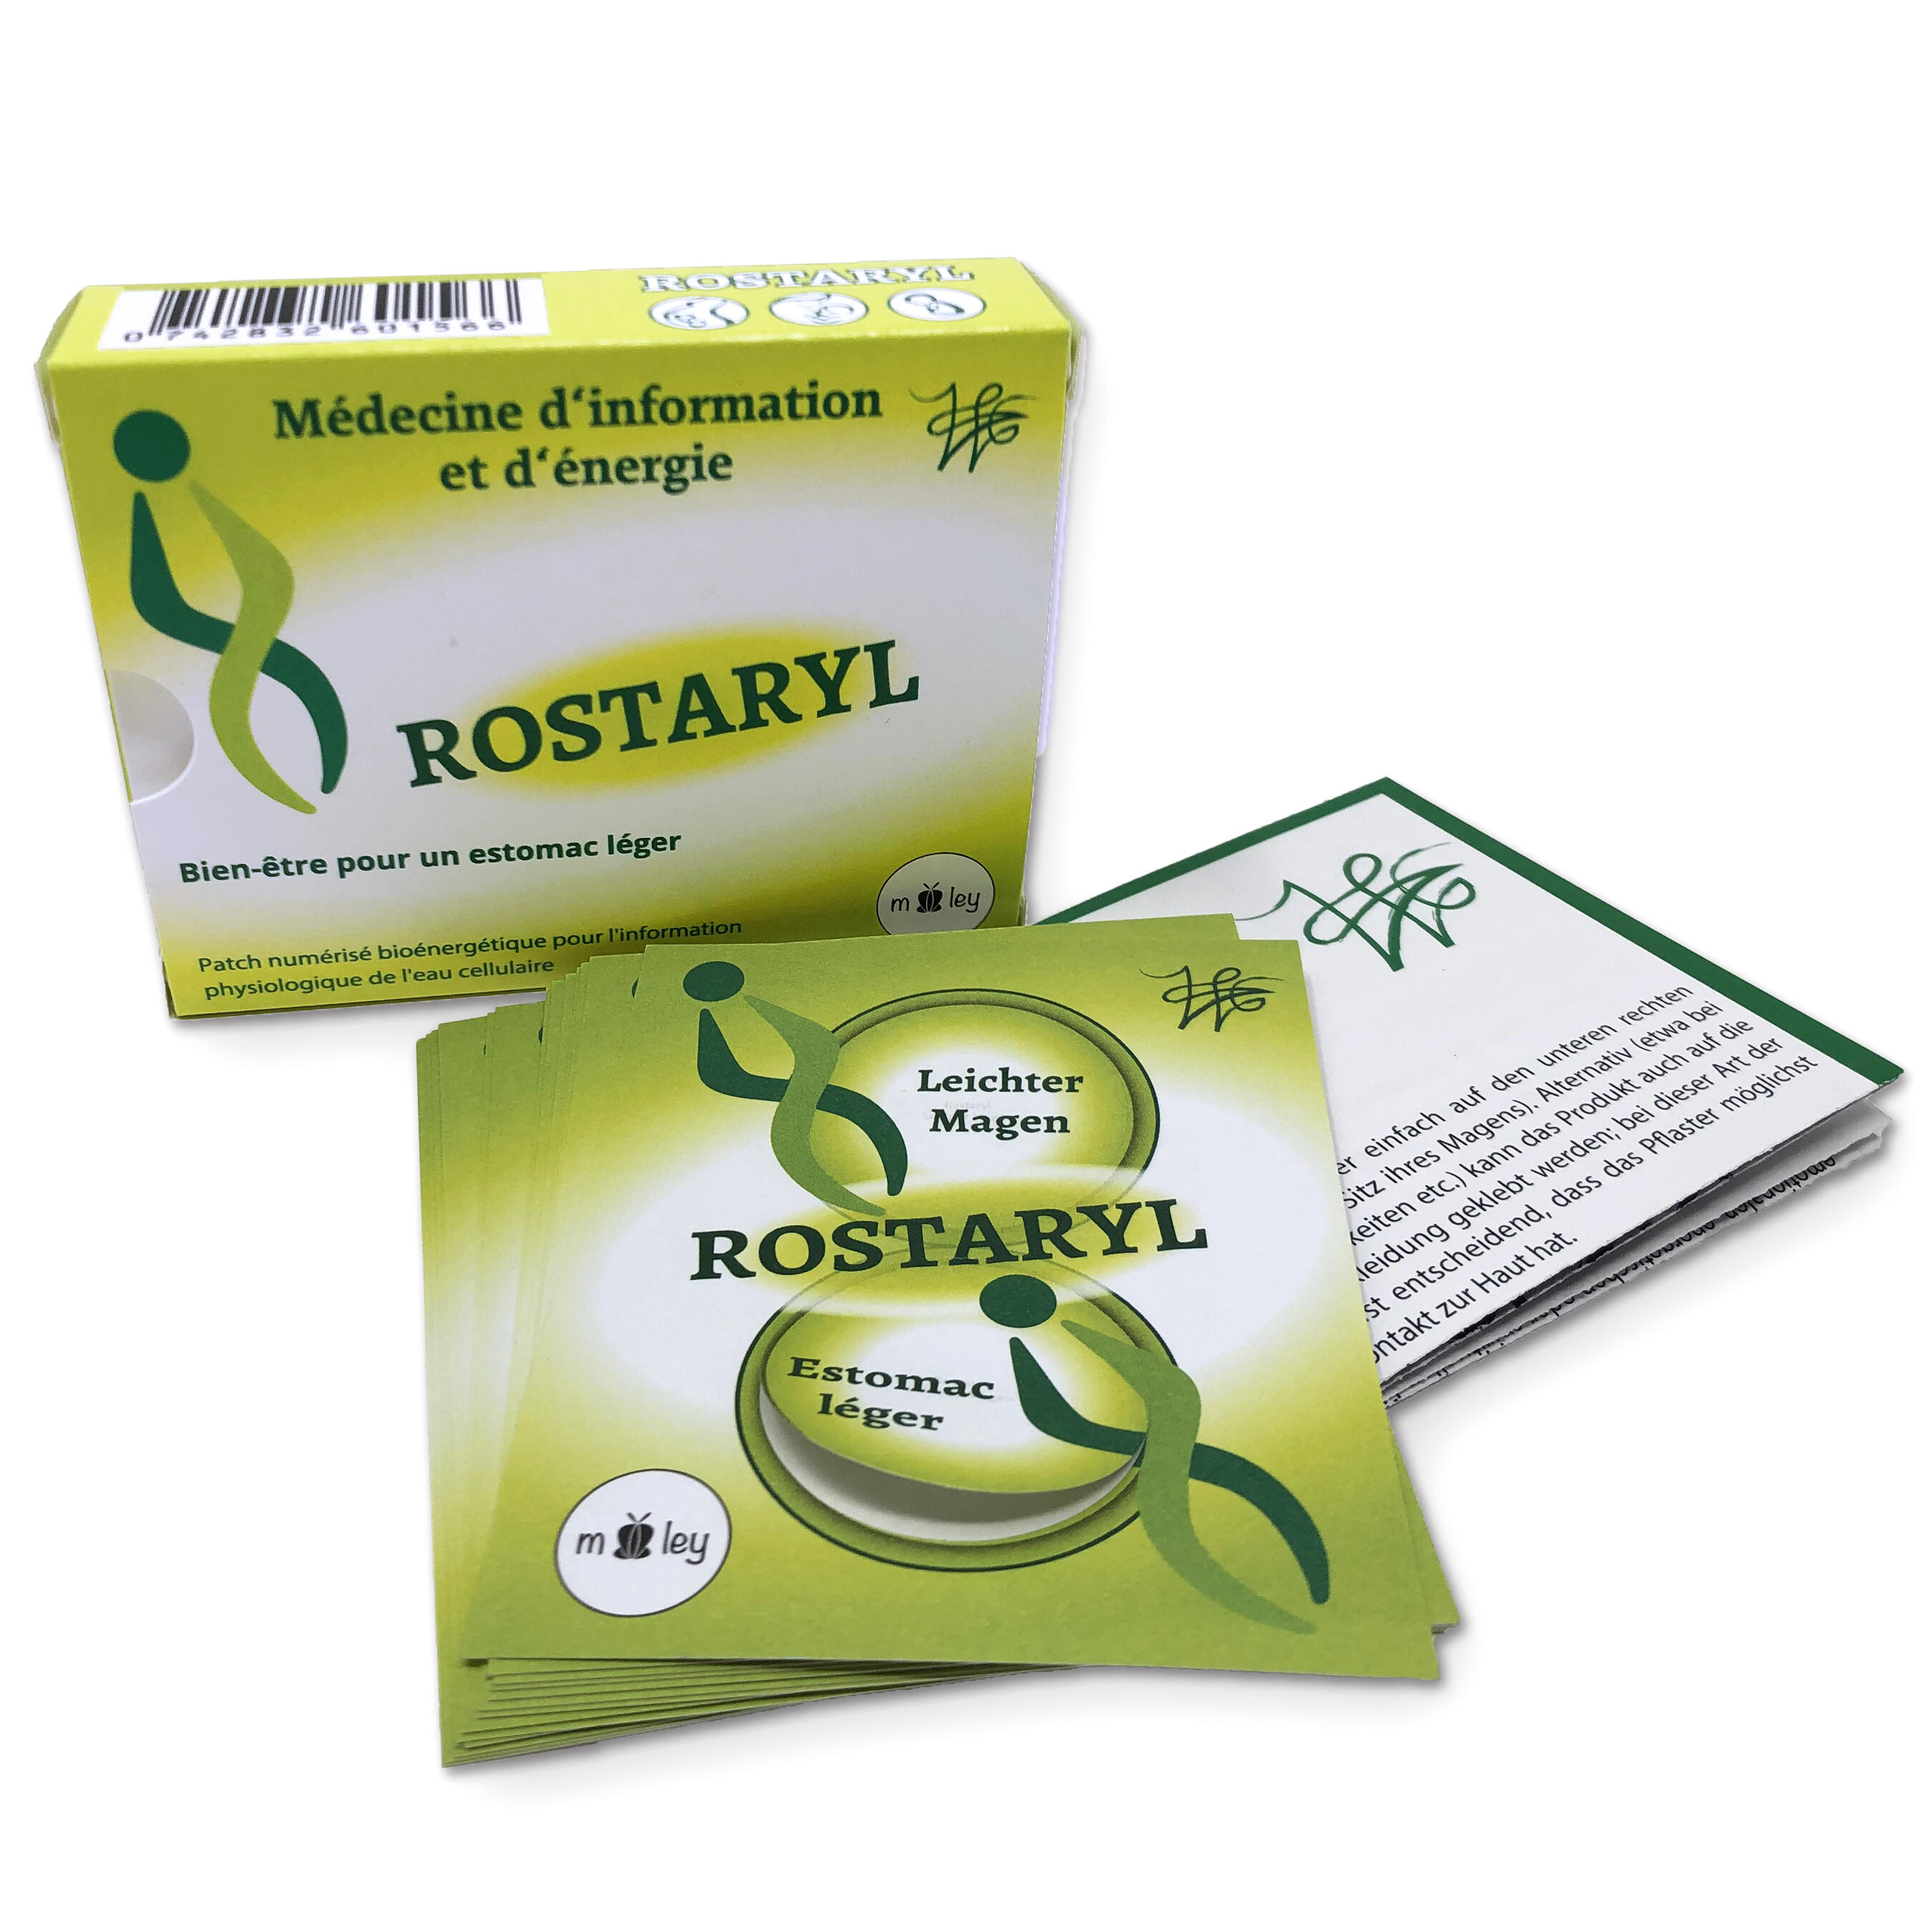 Rostaryl. - Contributes to a relaxed &amp; light stomach.